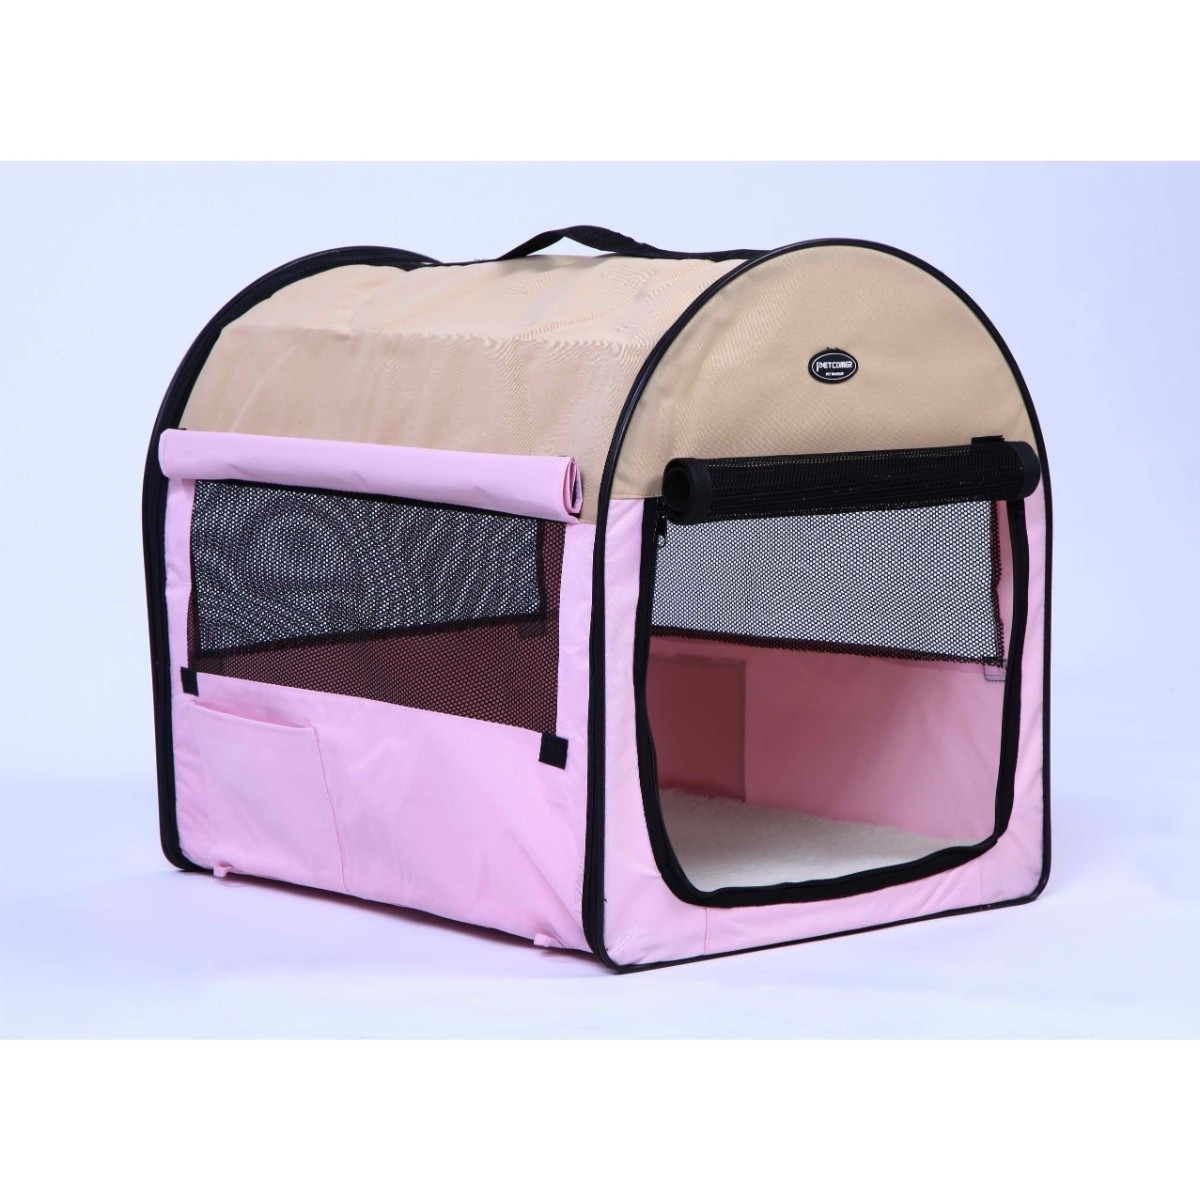 MKF Collection By Mia K. Handbag Doggy Boo Fashionable Bicycle Pet Carrier - Pink Beige S